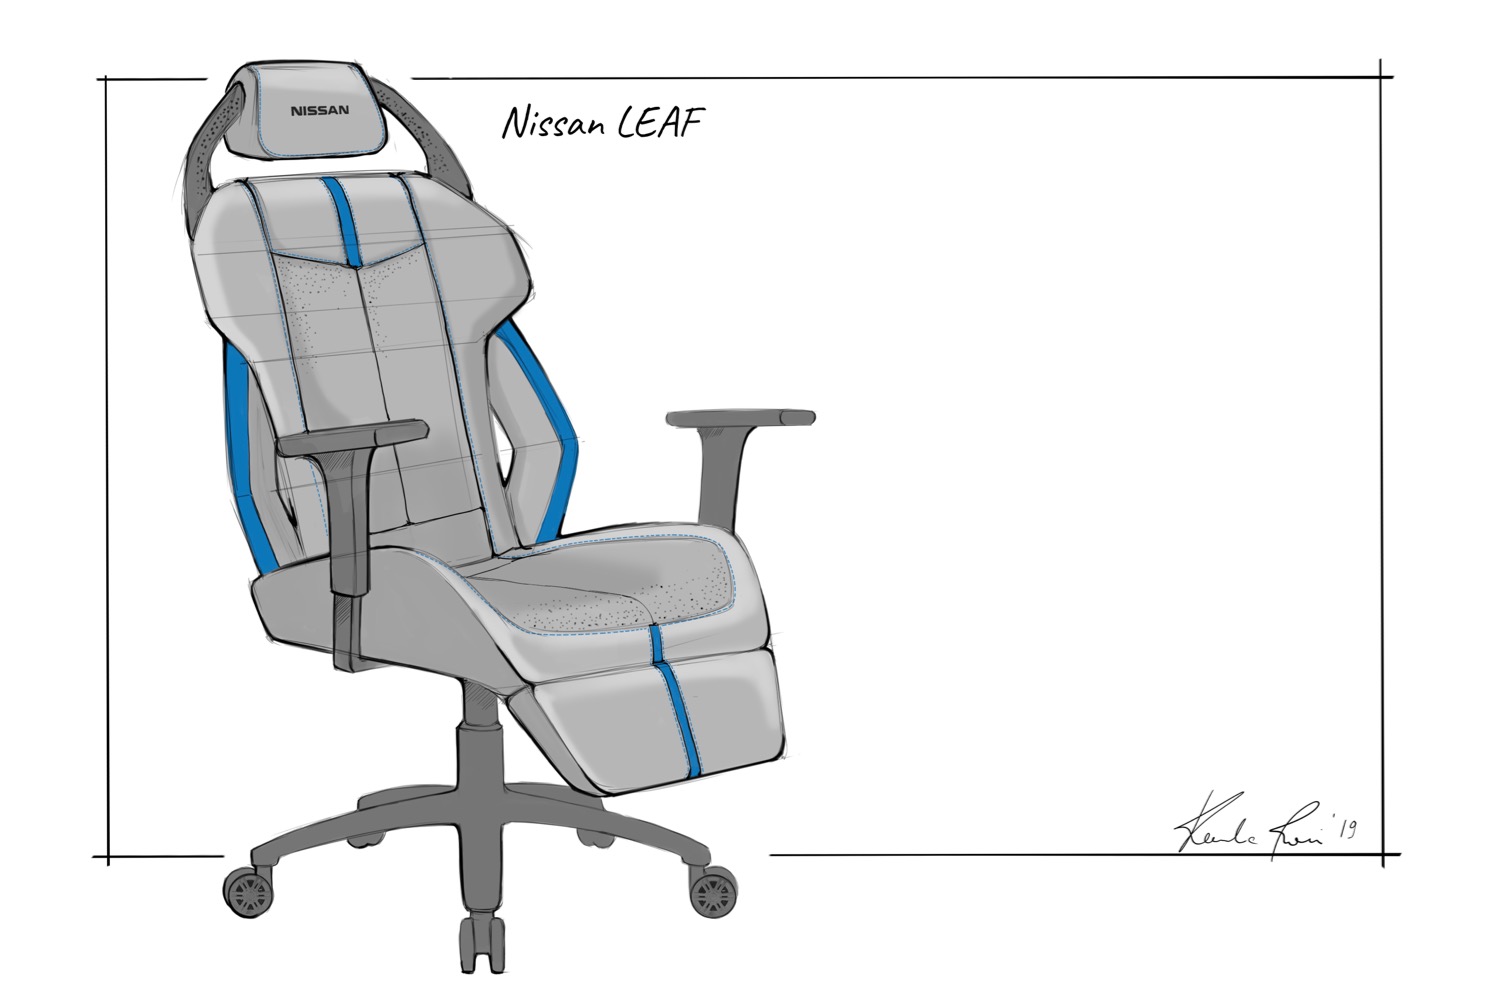 nissan designs gaming chairs based on gt r nismo leaf and armada chair